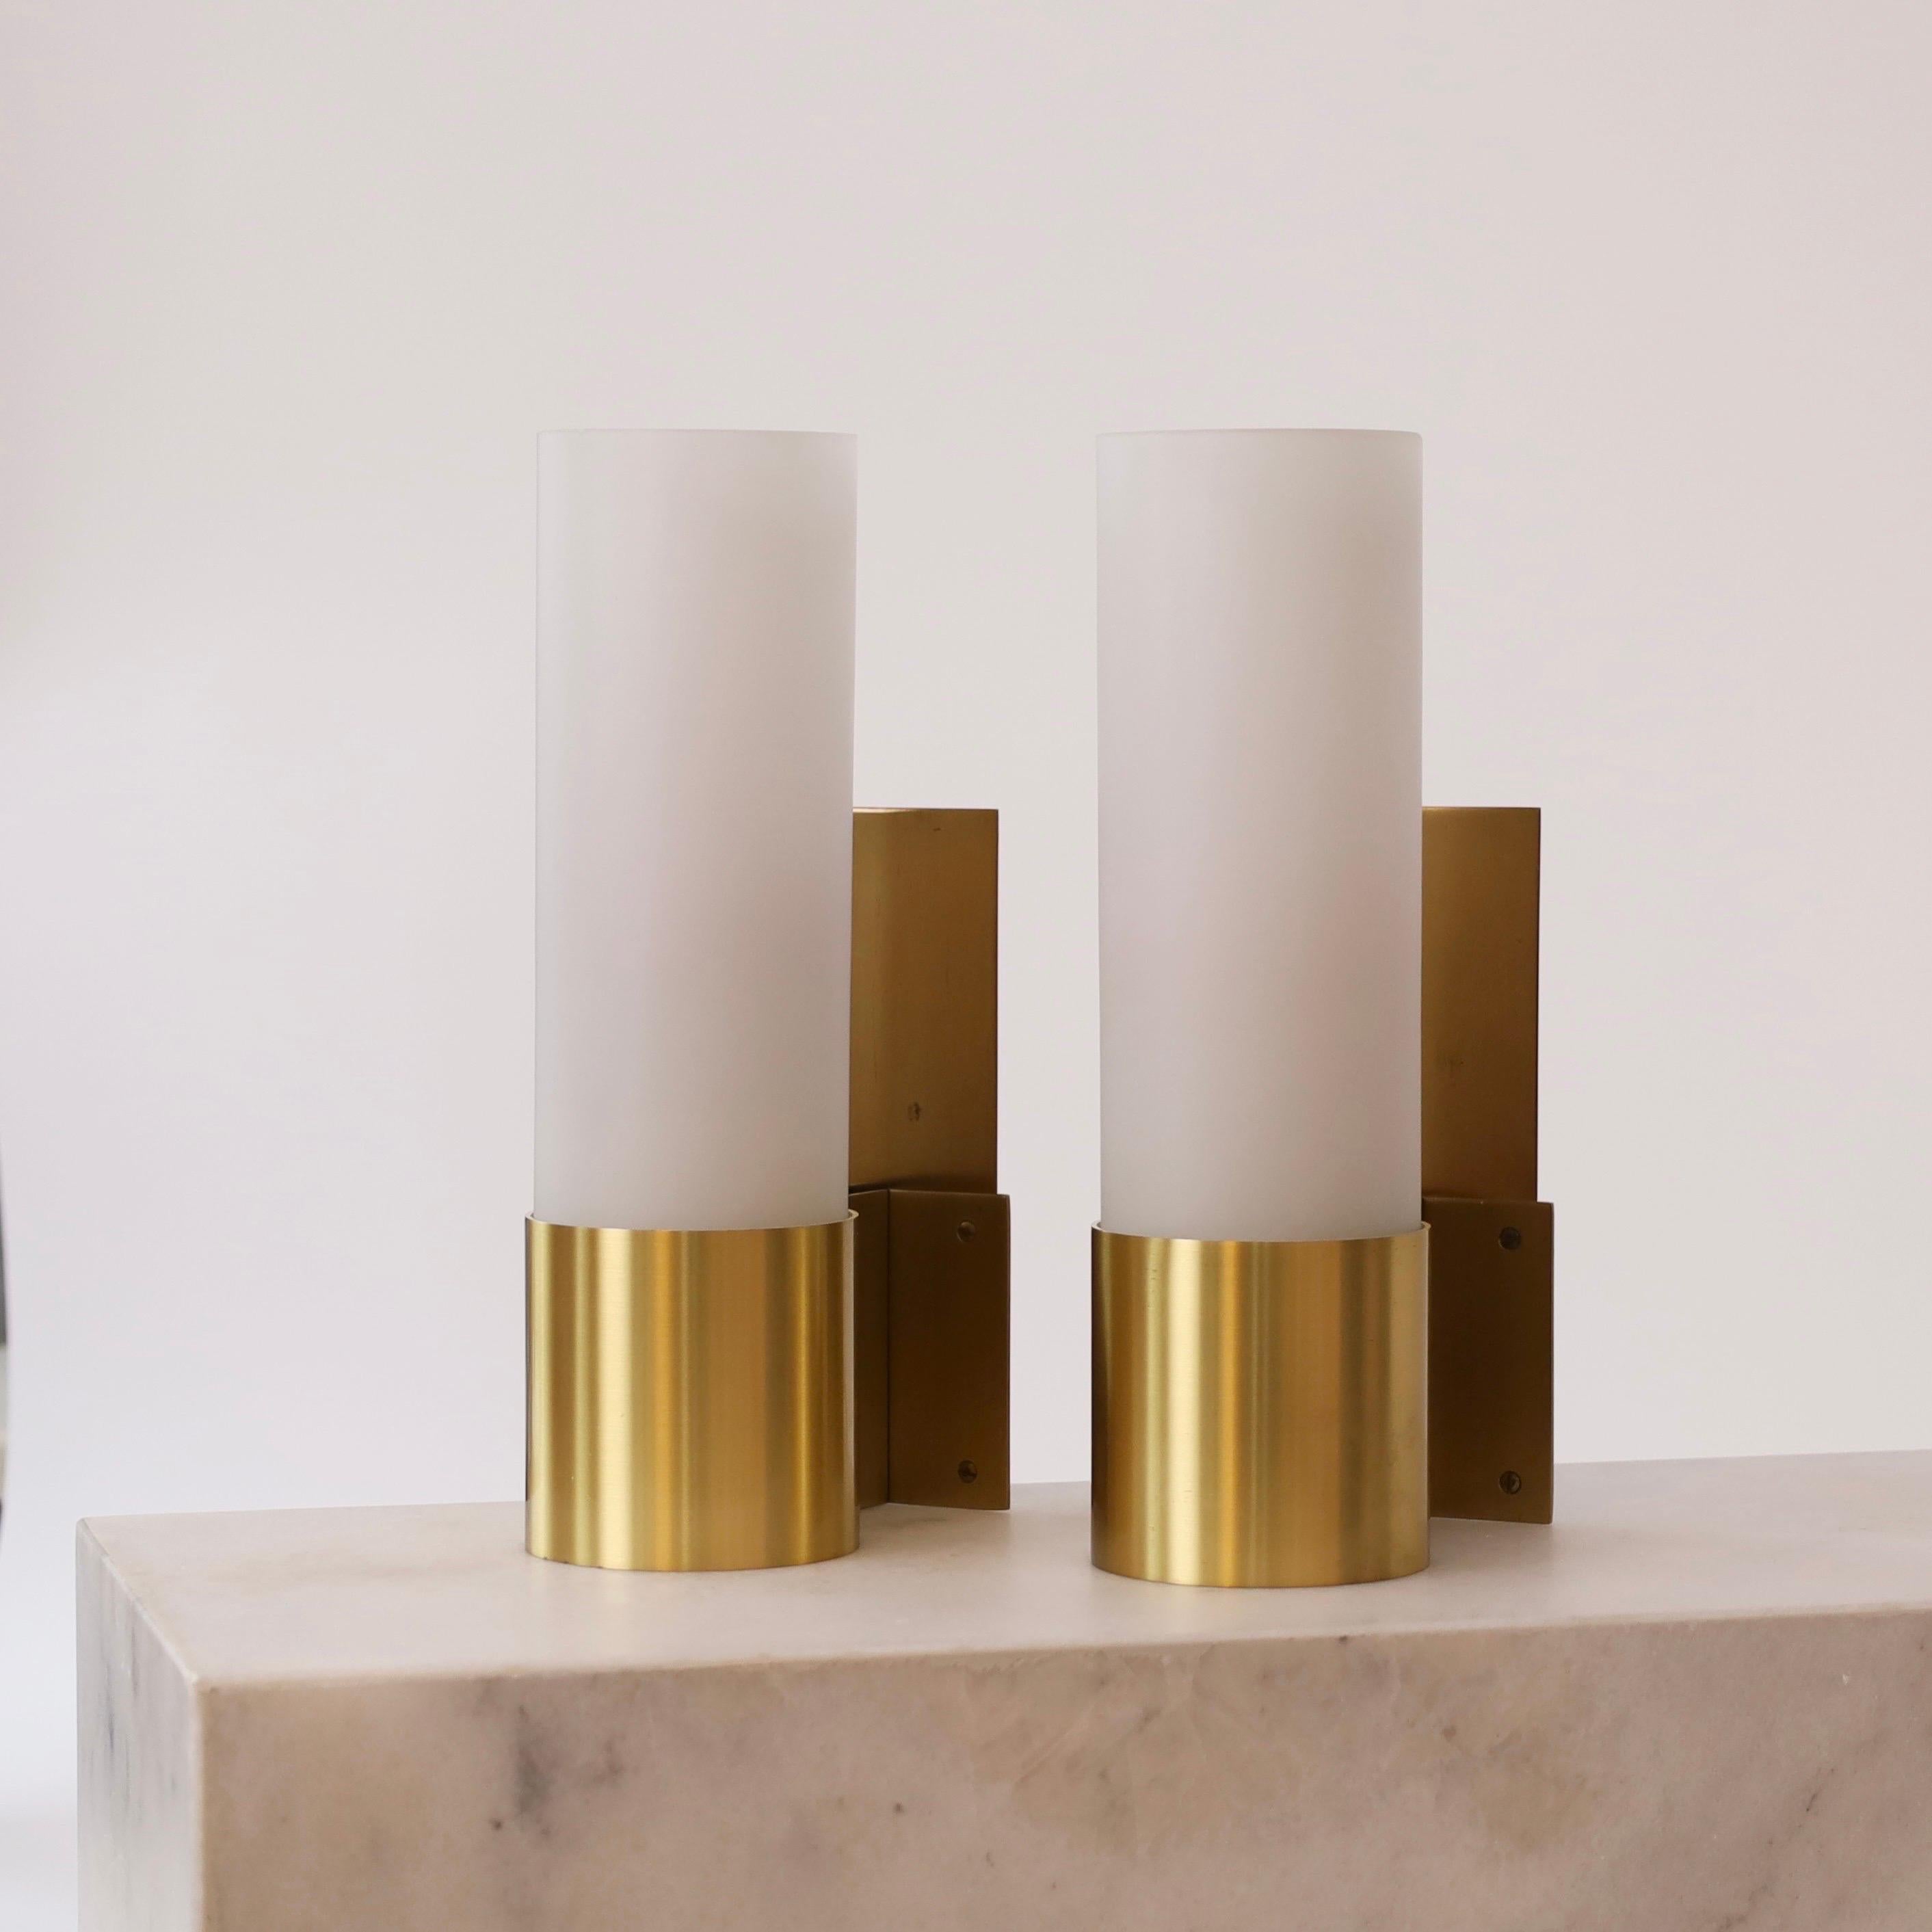 Rare set of Brass & Opaline glass sconces in great condition designed by Jørgen Bo for Fog & Mørup in 1968. A classic touch to a beautiful home. 

* A pair (2) of brass sconces with white mouth-blown Opaline shades
* Designer: Jørgen Bo
* Model: